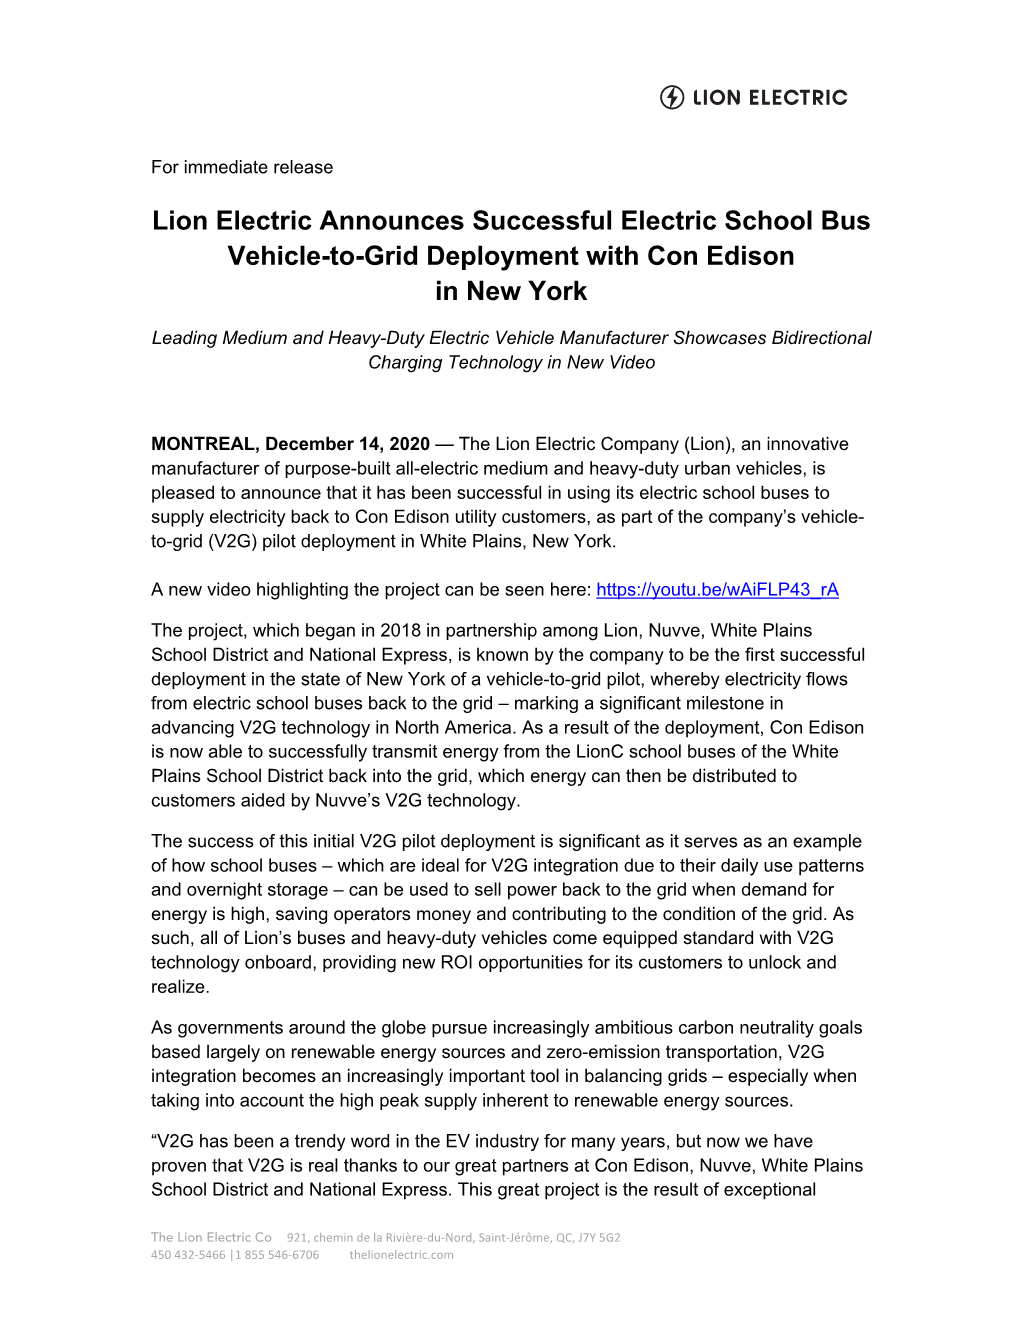 Lion Electric Announces Successful Electric School Bus Vehicle-To-Grid Deployment with Con Edison in New York